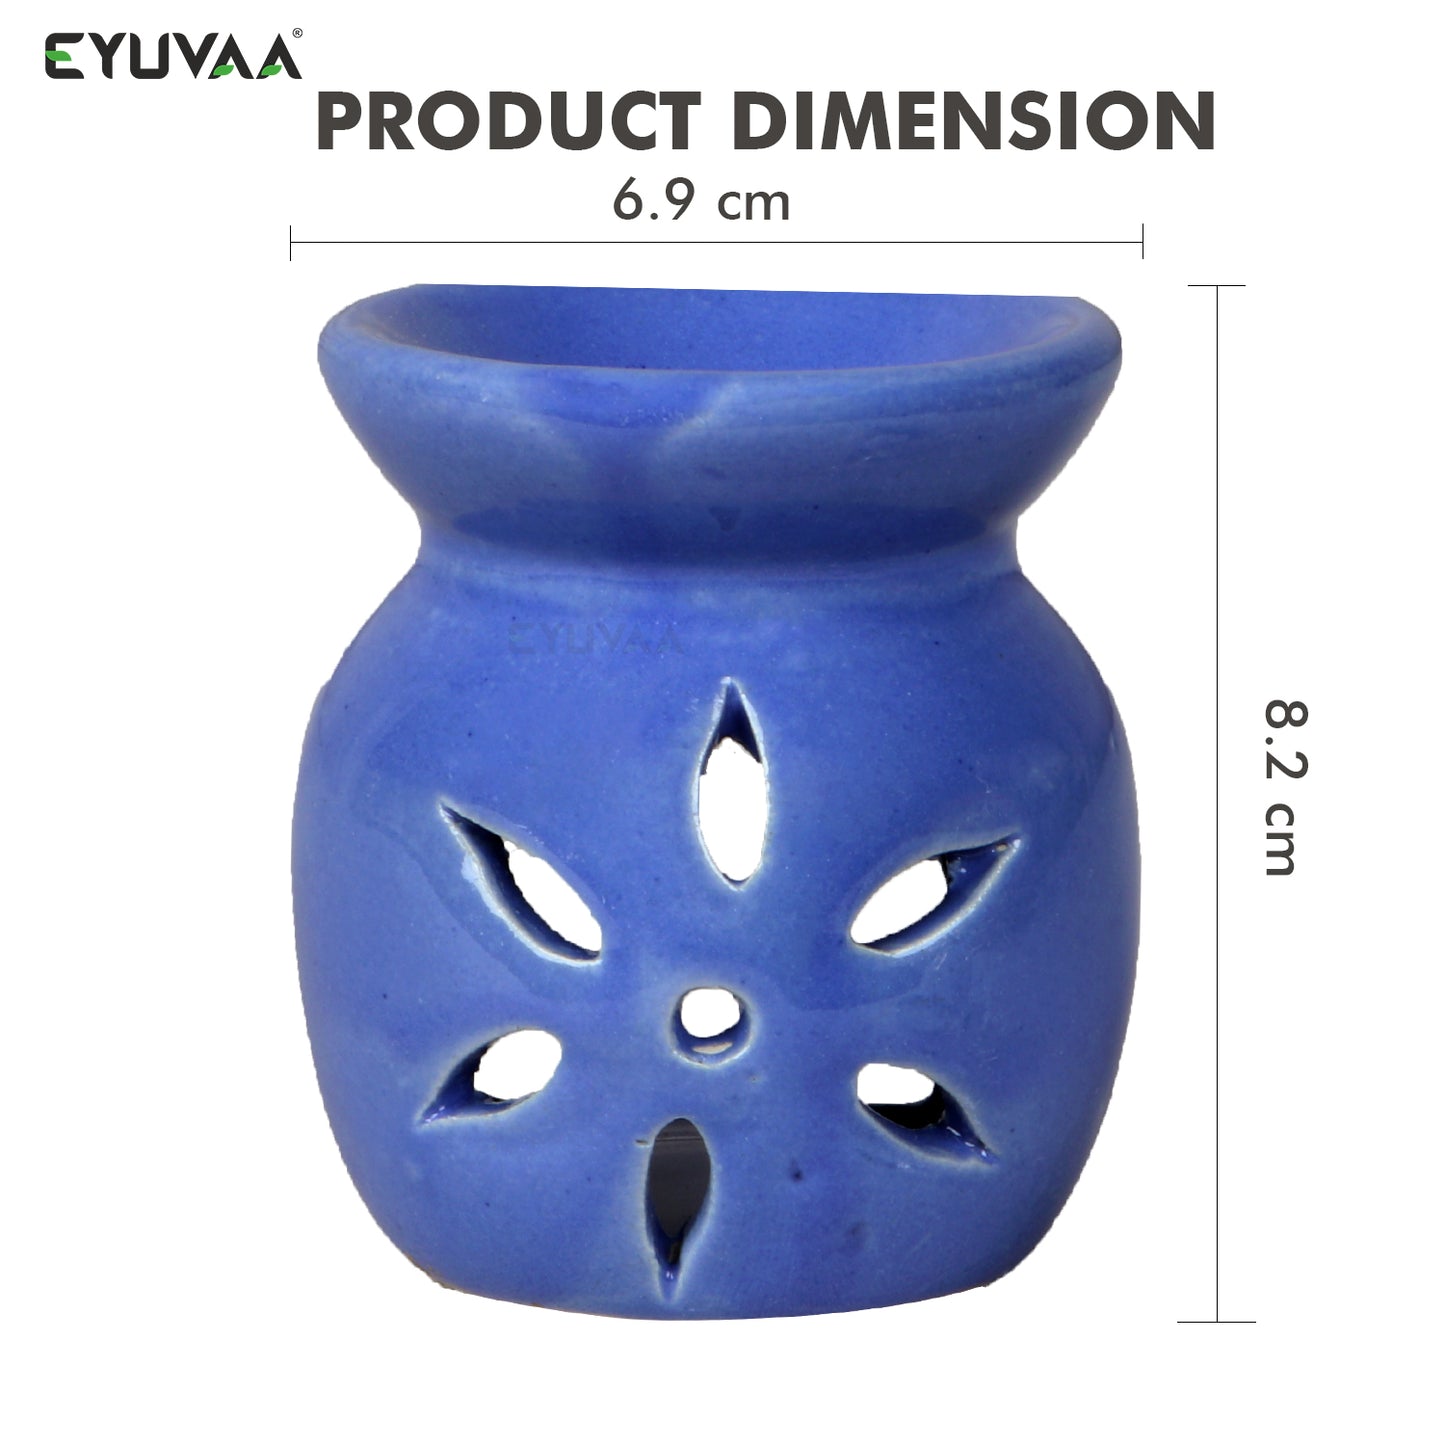 Combo Pack of Colored Ceramic Diffuser with Tea Light Candle & Aroma Oil (Blue)